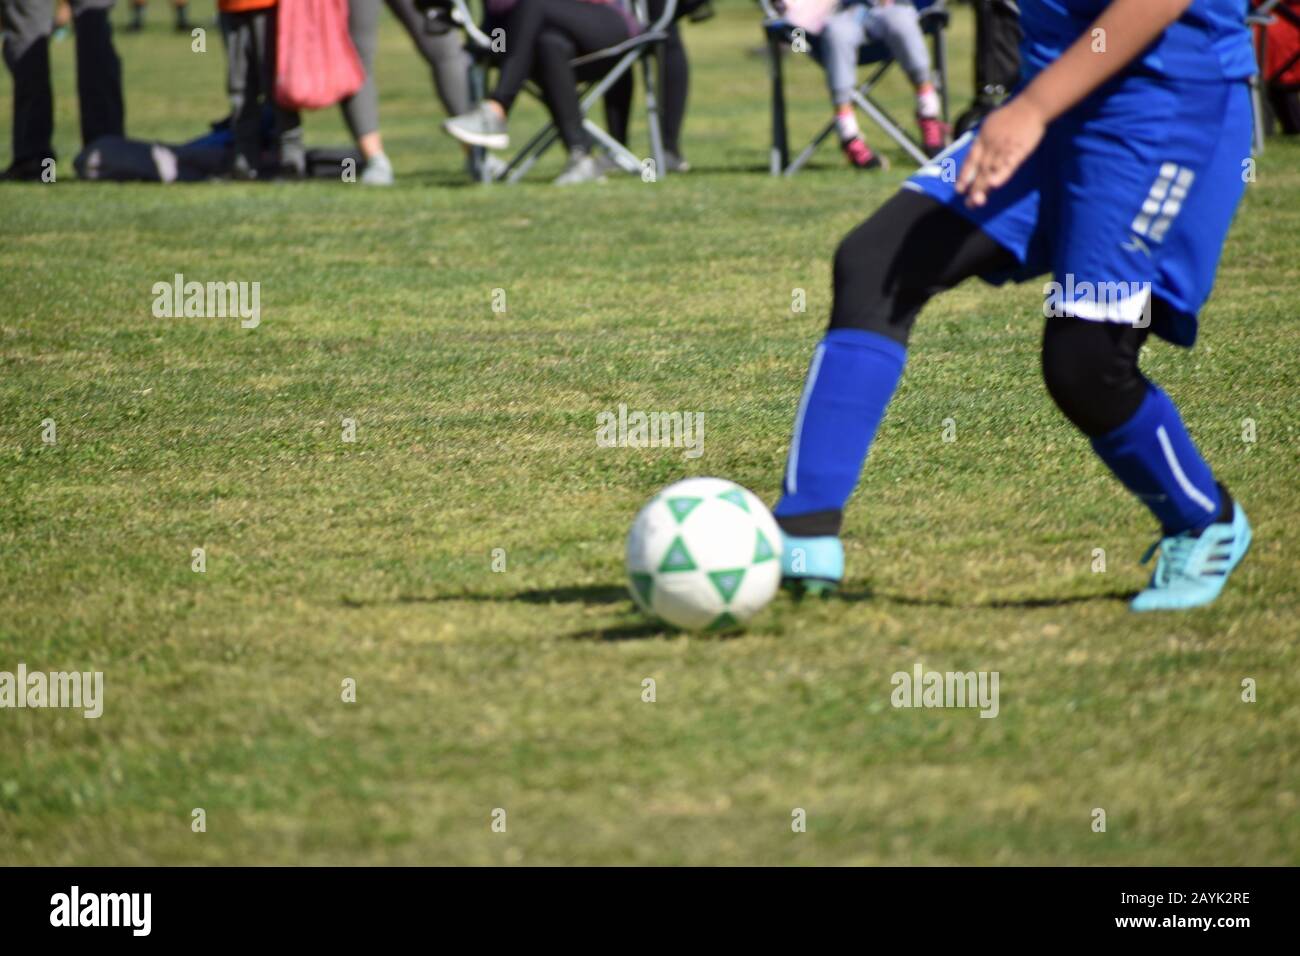 Footwork in Soccer Stock Photo